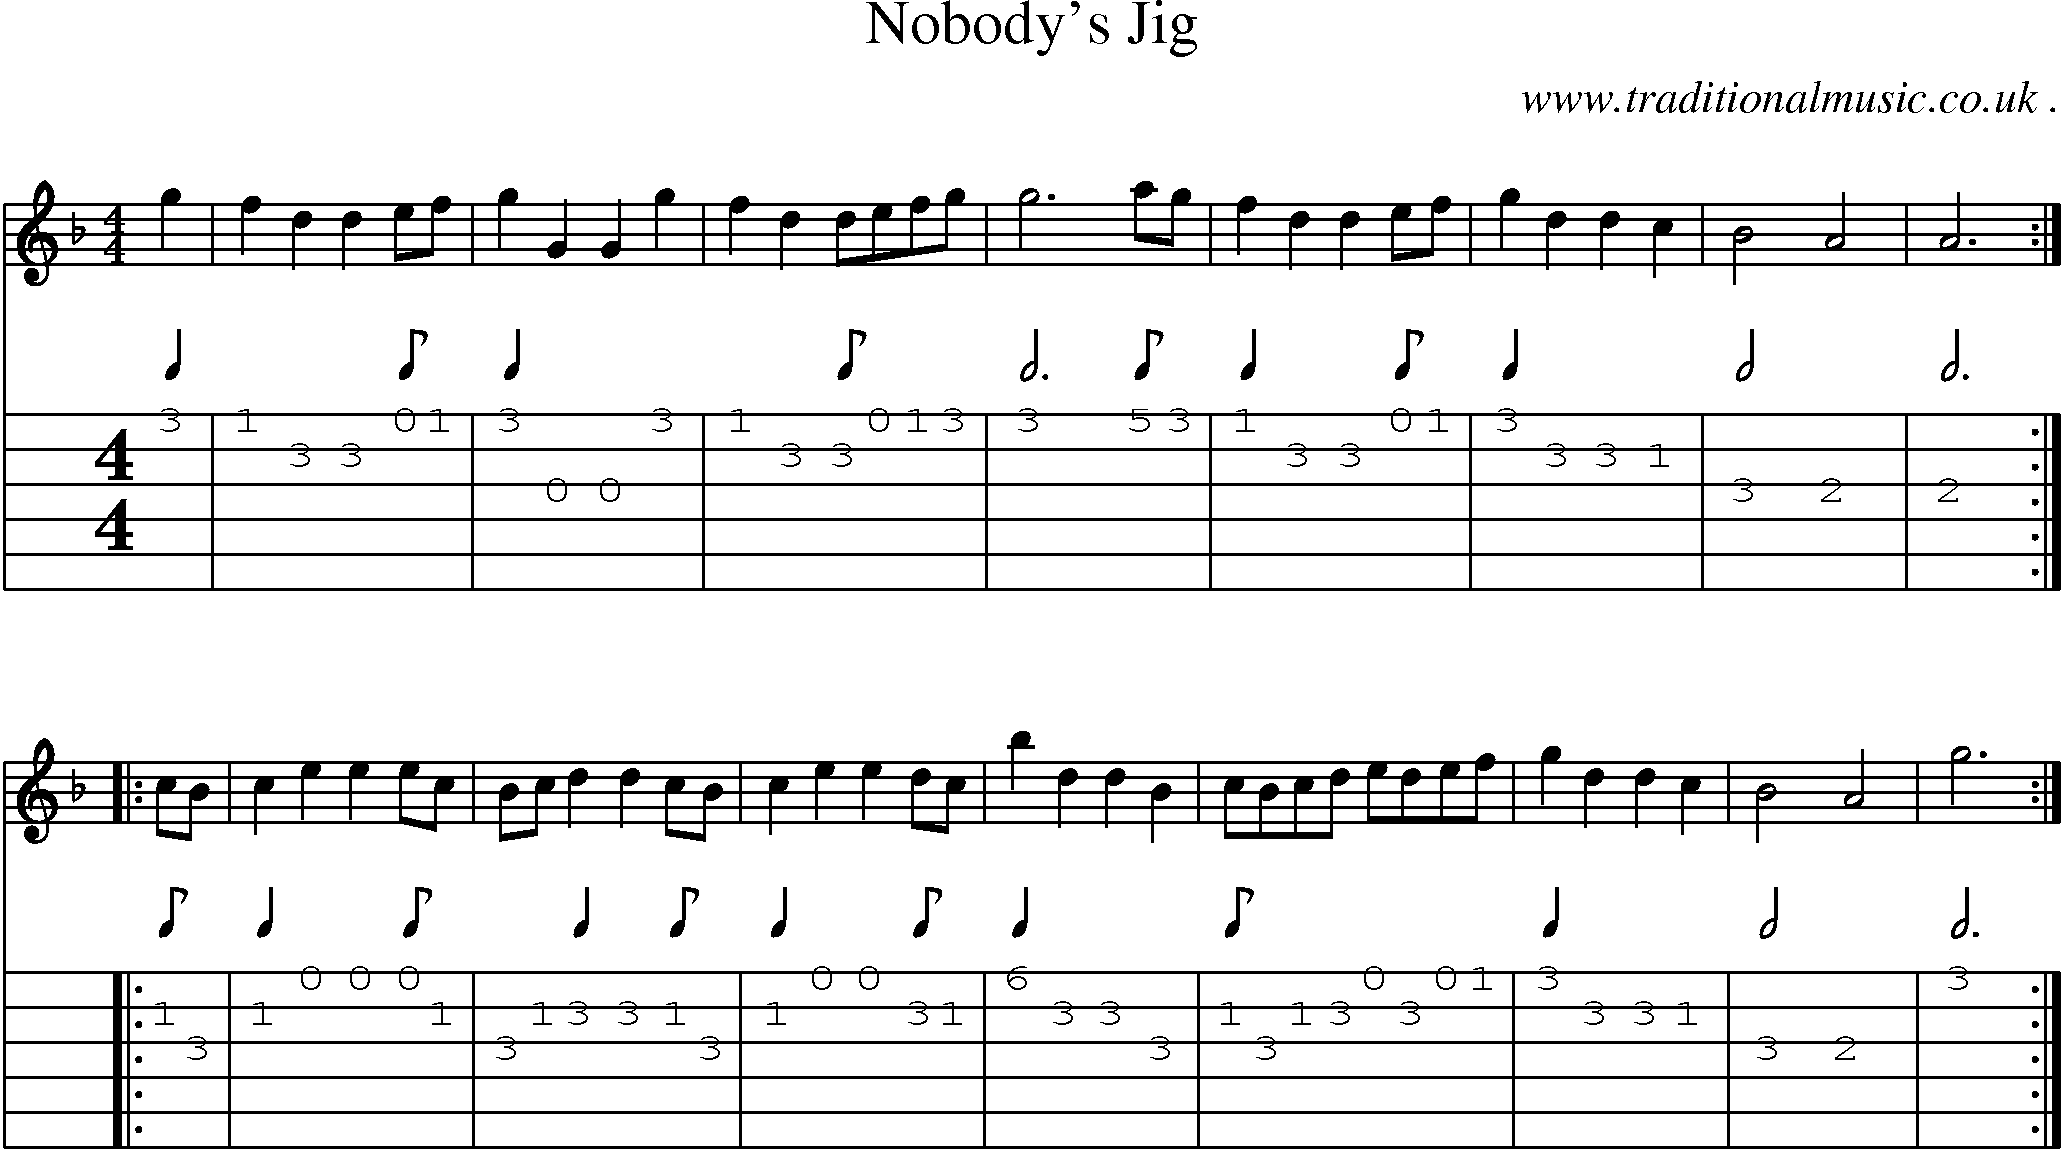 Sheet-Music and Guitar Tabs for Nobodys Jig